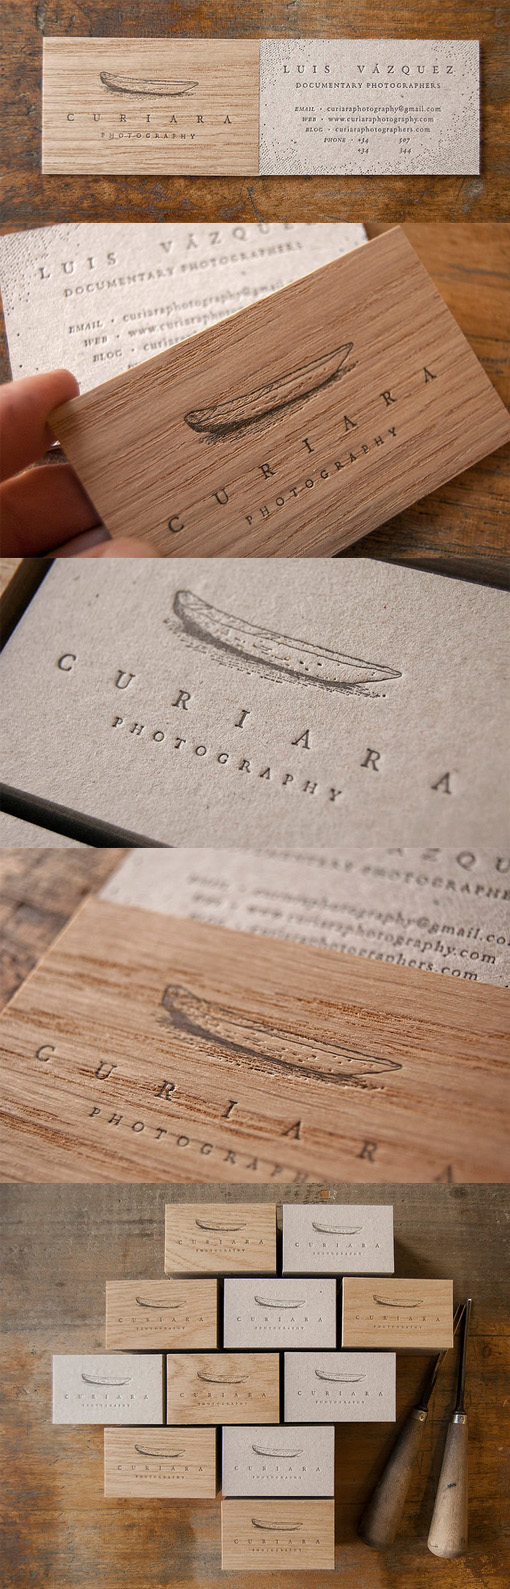 Clever Layered Letterpress Wooden Business Card Design For A Photographer